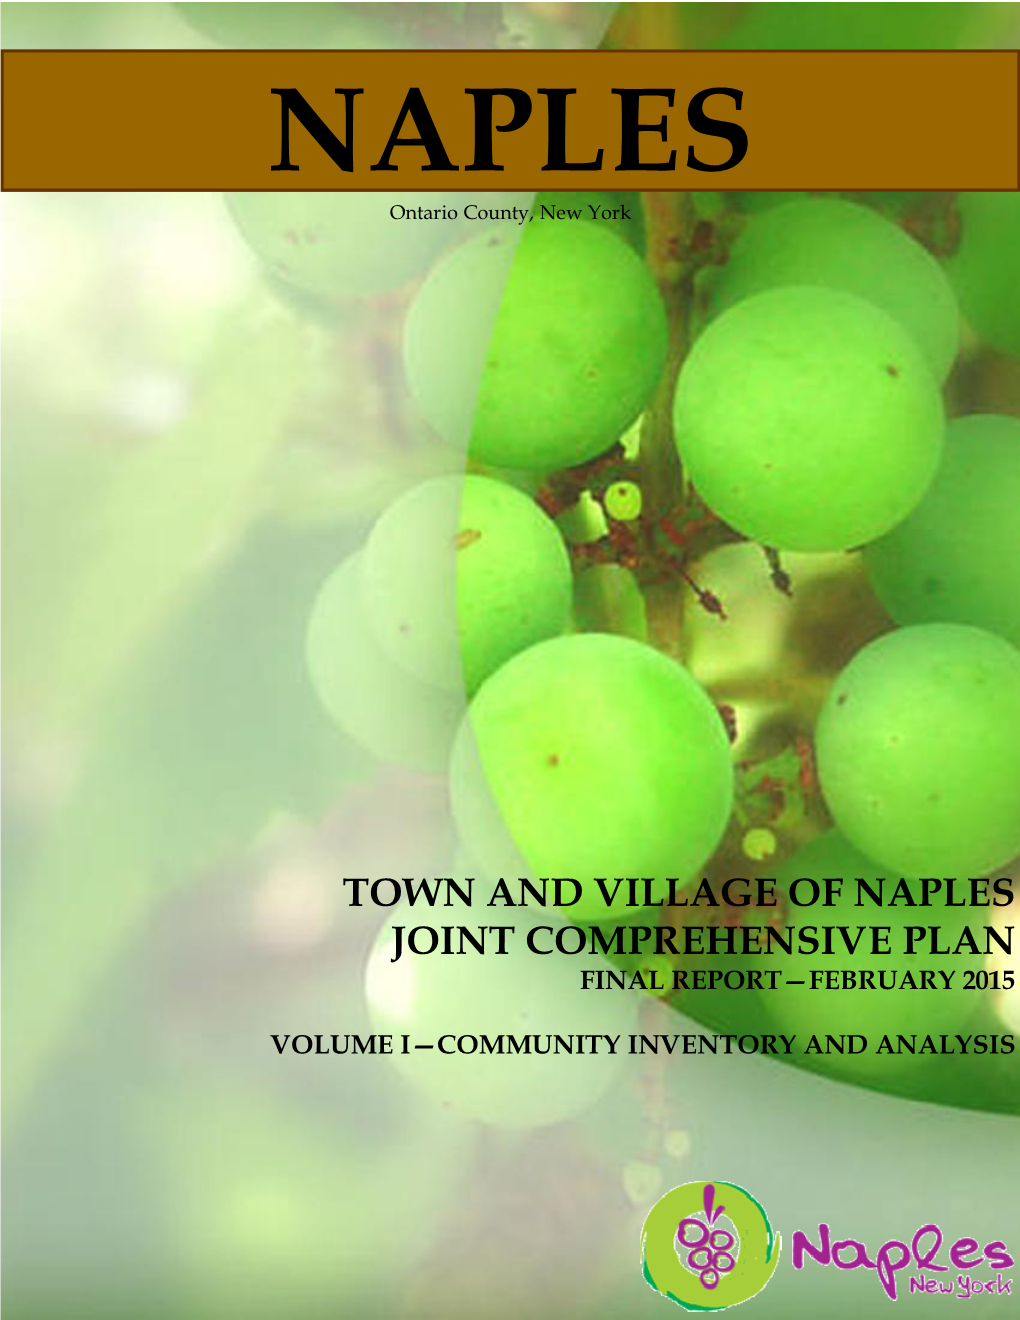 Town and Village of Naples Joint Comprehensive Plan Final Report—February 2015